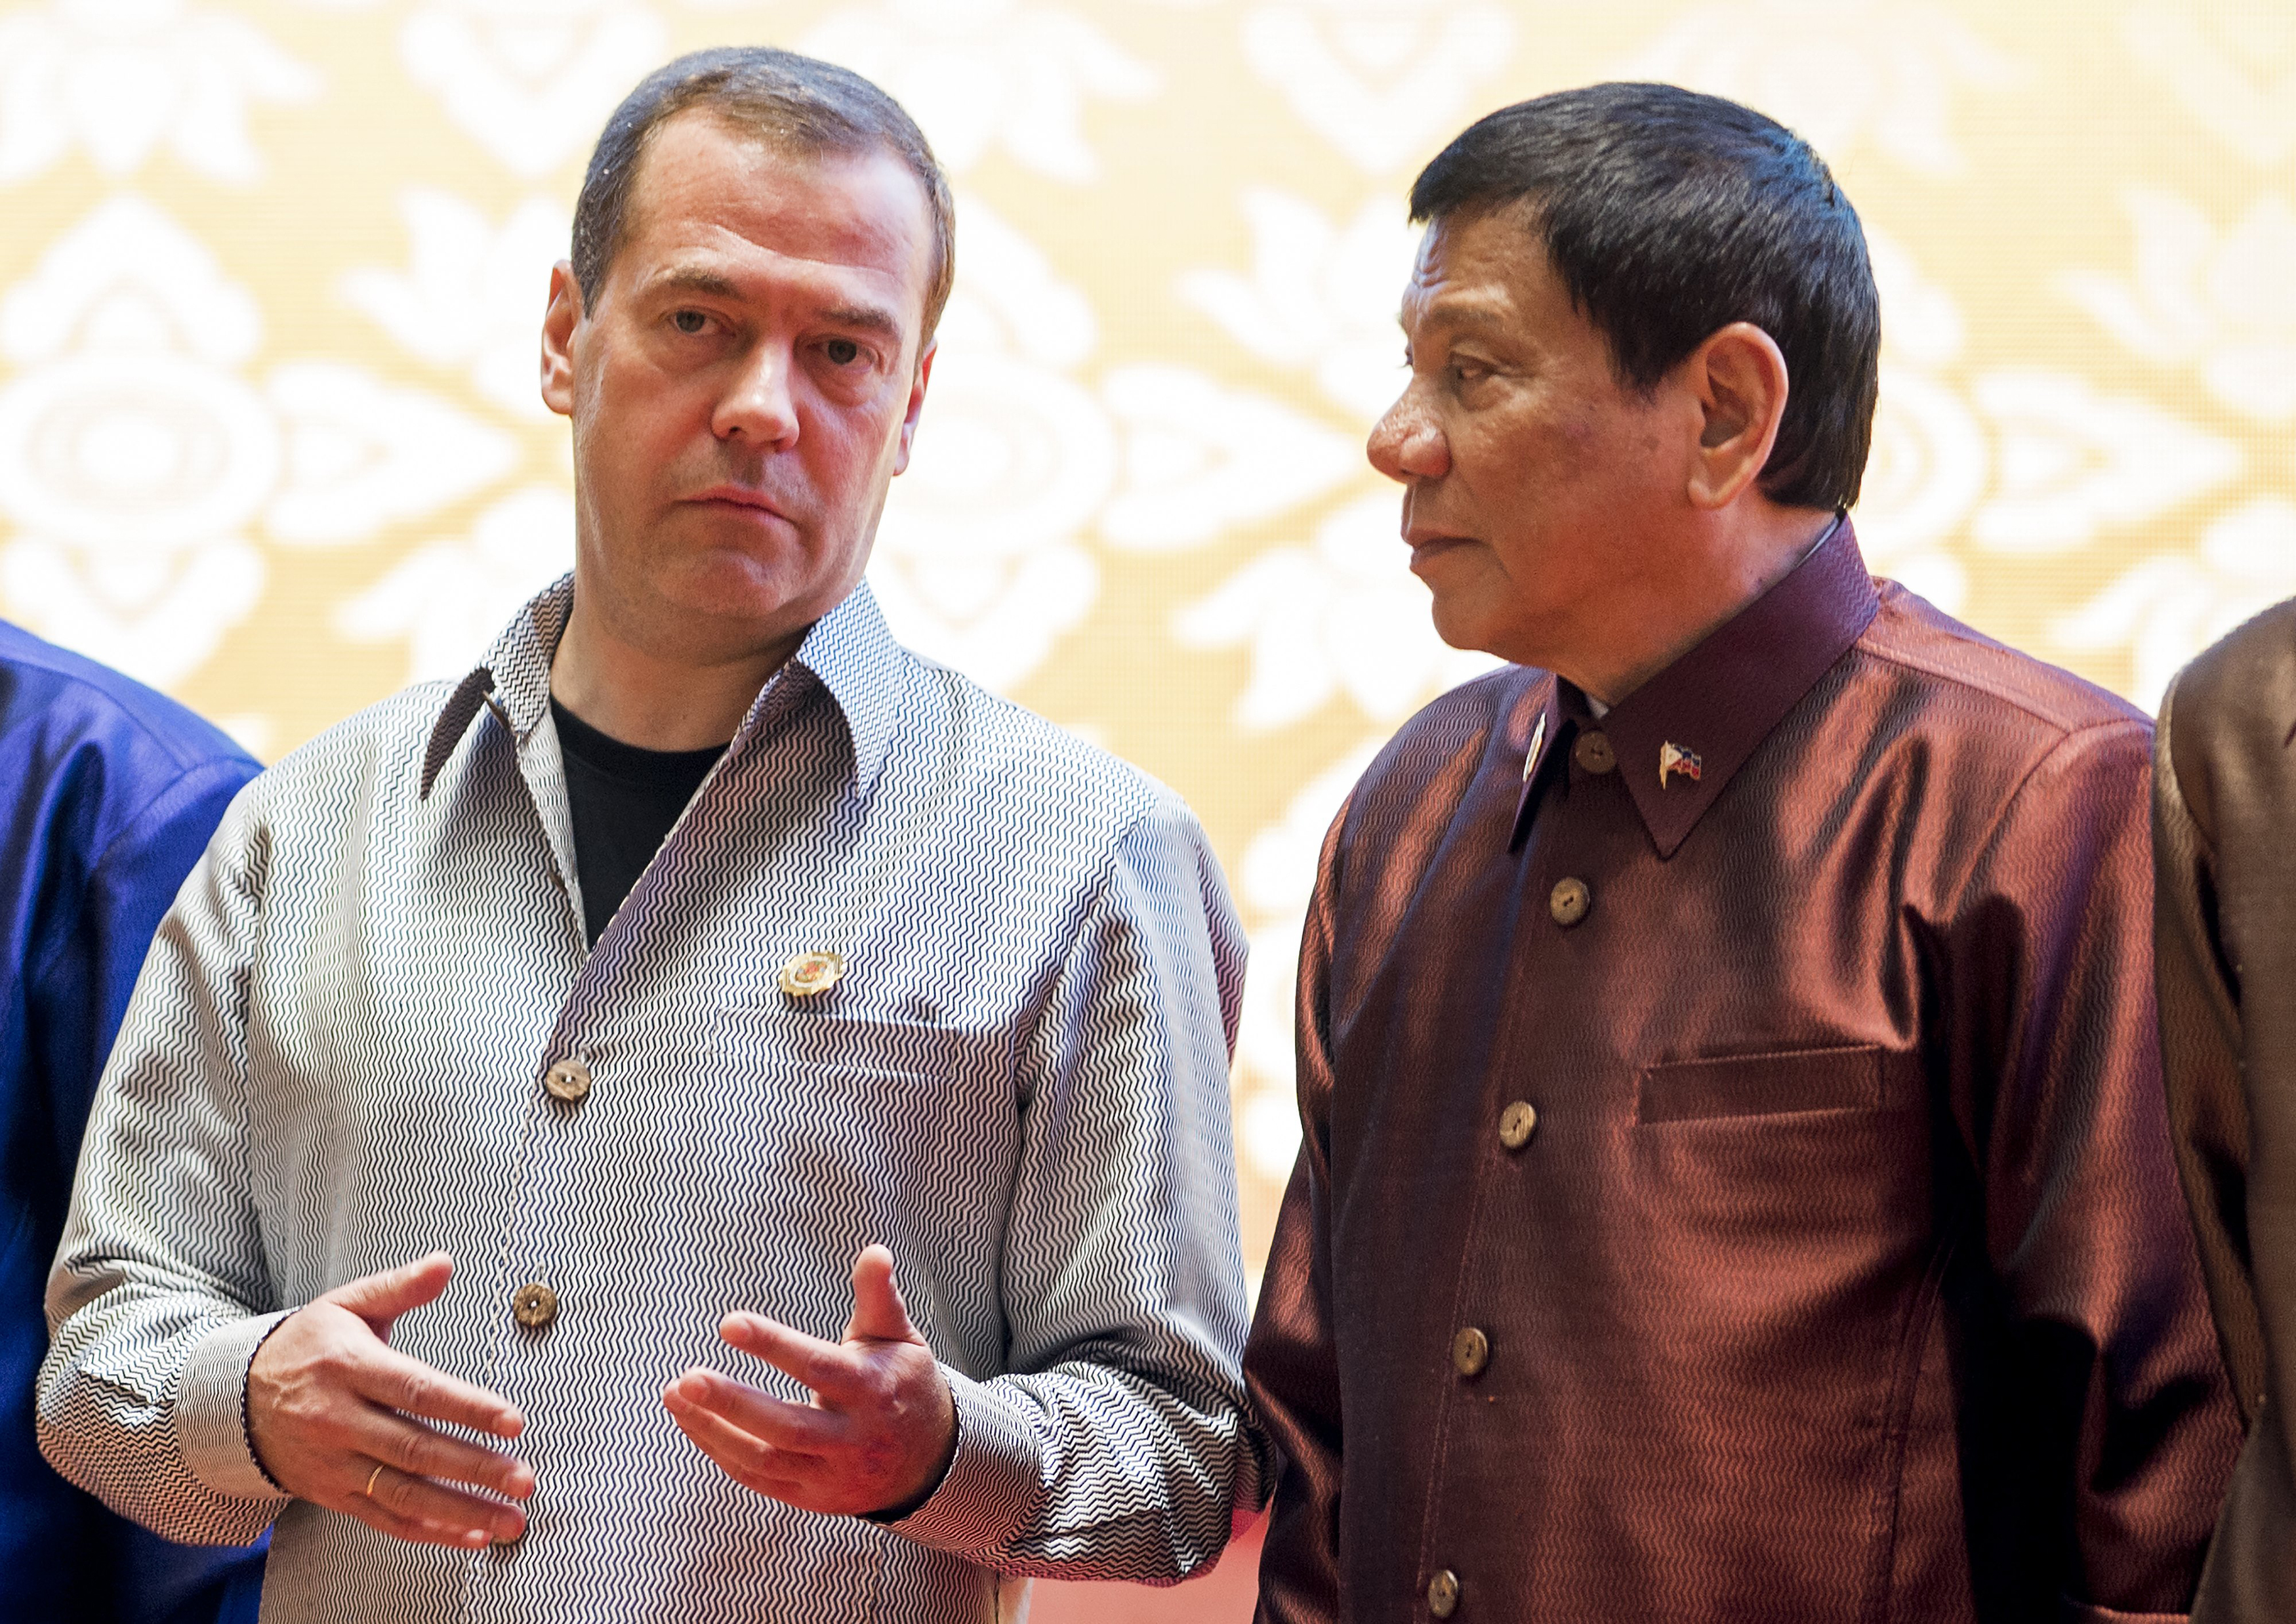 Russian Prime Minister Dmitry Medvedev (L) chats with Philippine President Rodrigo Duterte as they attend the gala dinner during the second day of the Association of Southeast Asian Nations (ASEAN) Summit in Vientiane on September 7, 2016. The gathering will see the 10 ASEAN members meet by themselves, then with leaders from the US, Japan, South Korea and China. / AFP PHOTO / YE AUNG THU